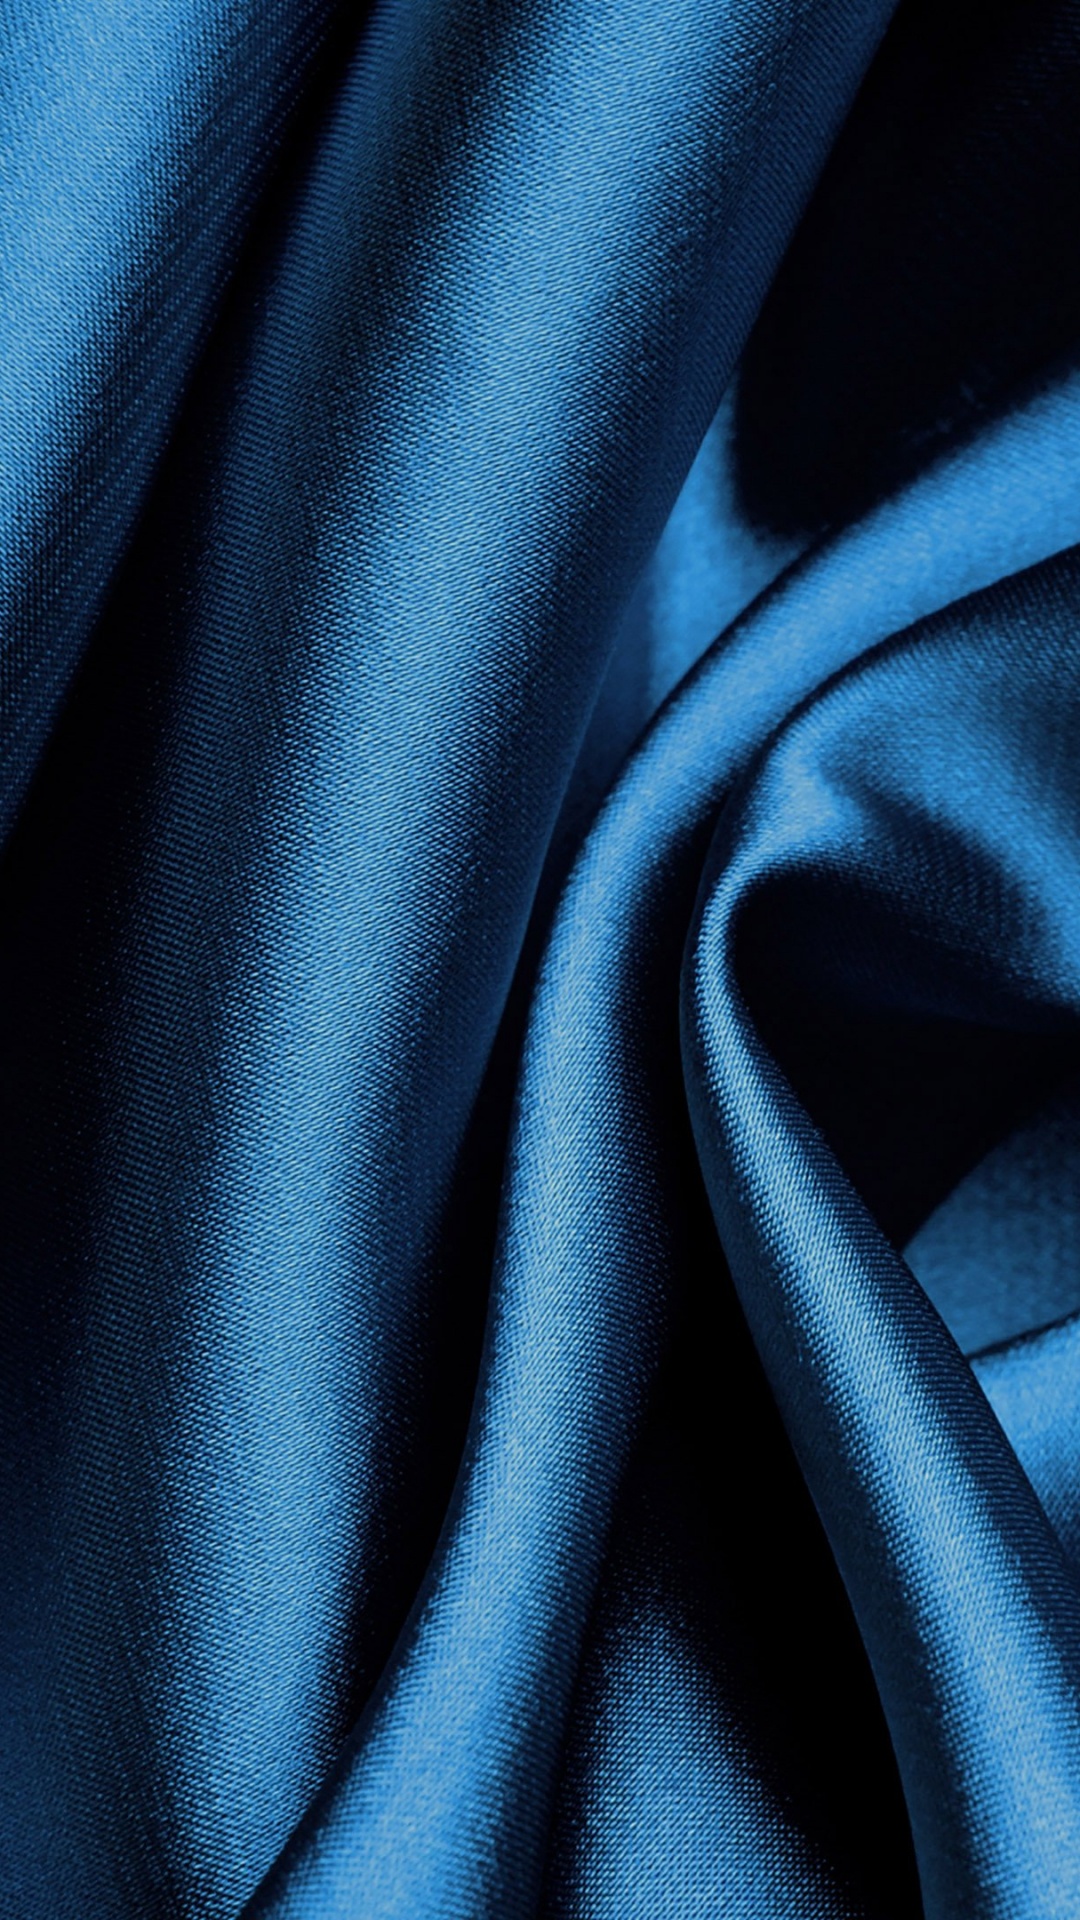 Blue Textile in Close up Photography. Wallpaper in 1080x1920 Resolution